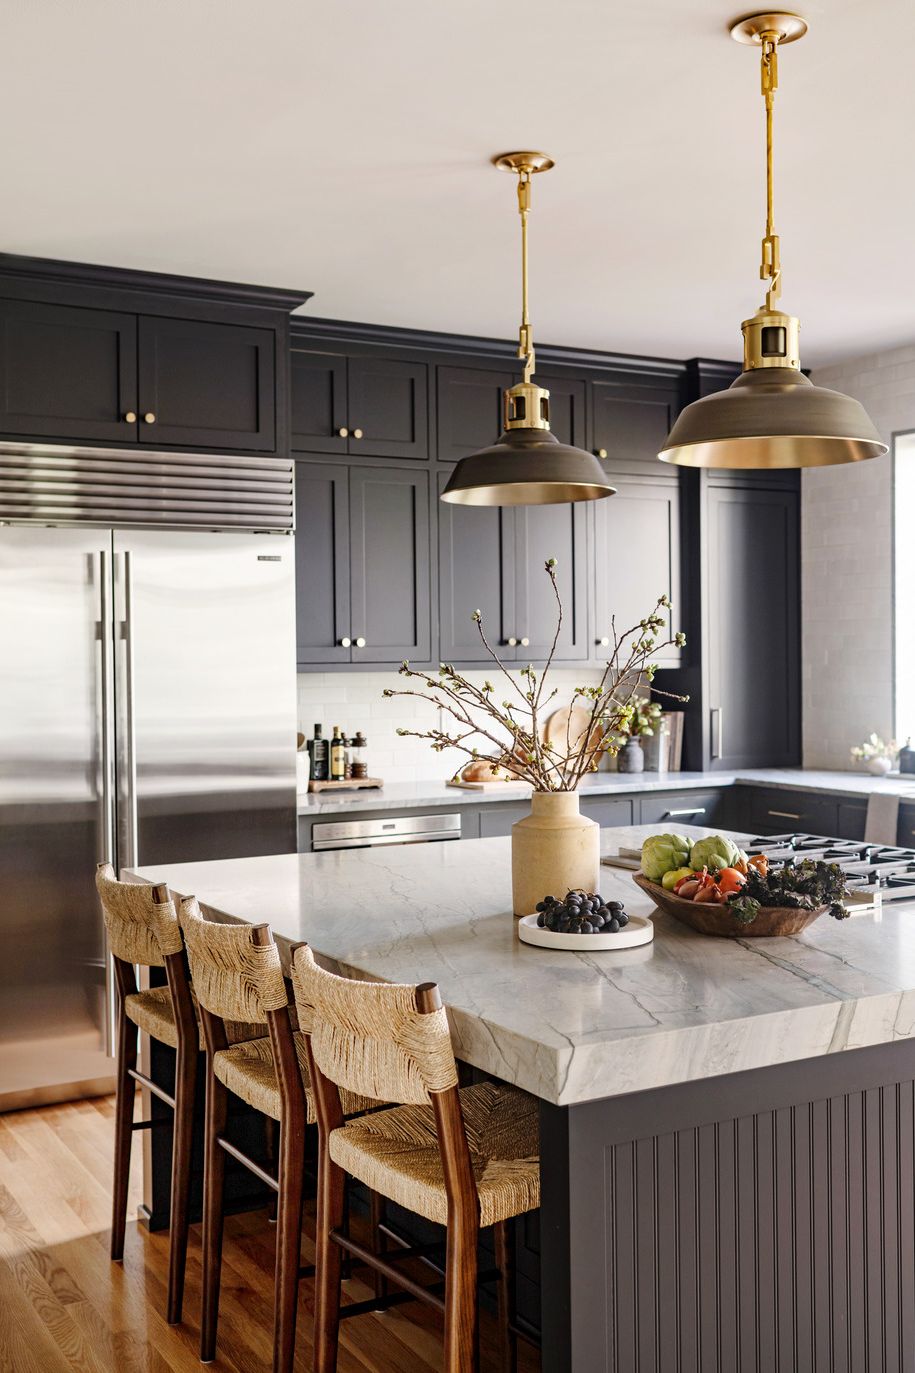 kitchen designed by emily ruff of cohesively curated interiors